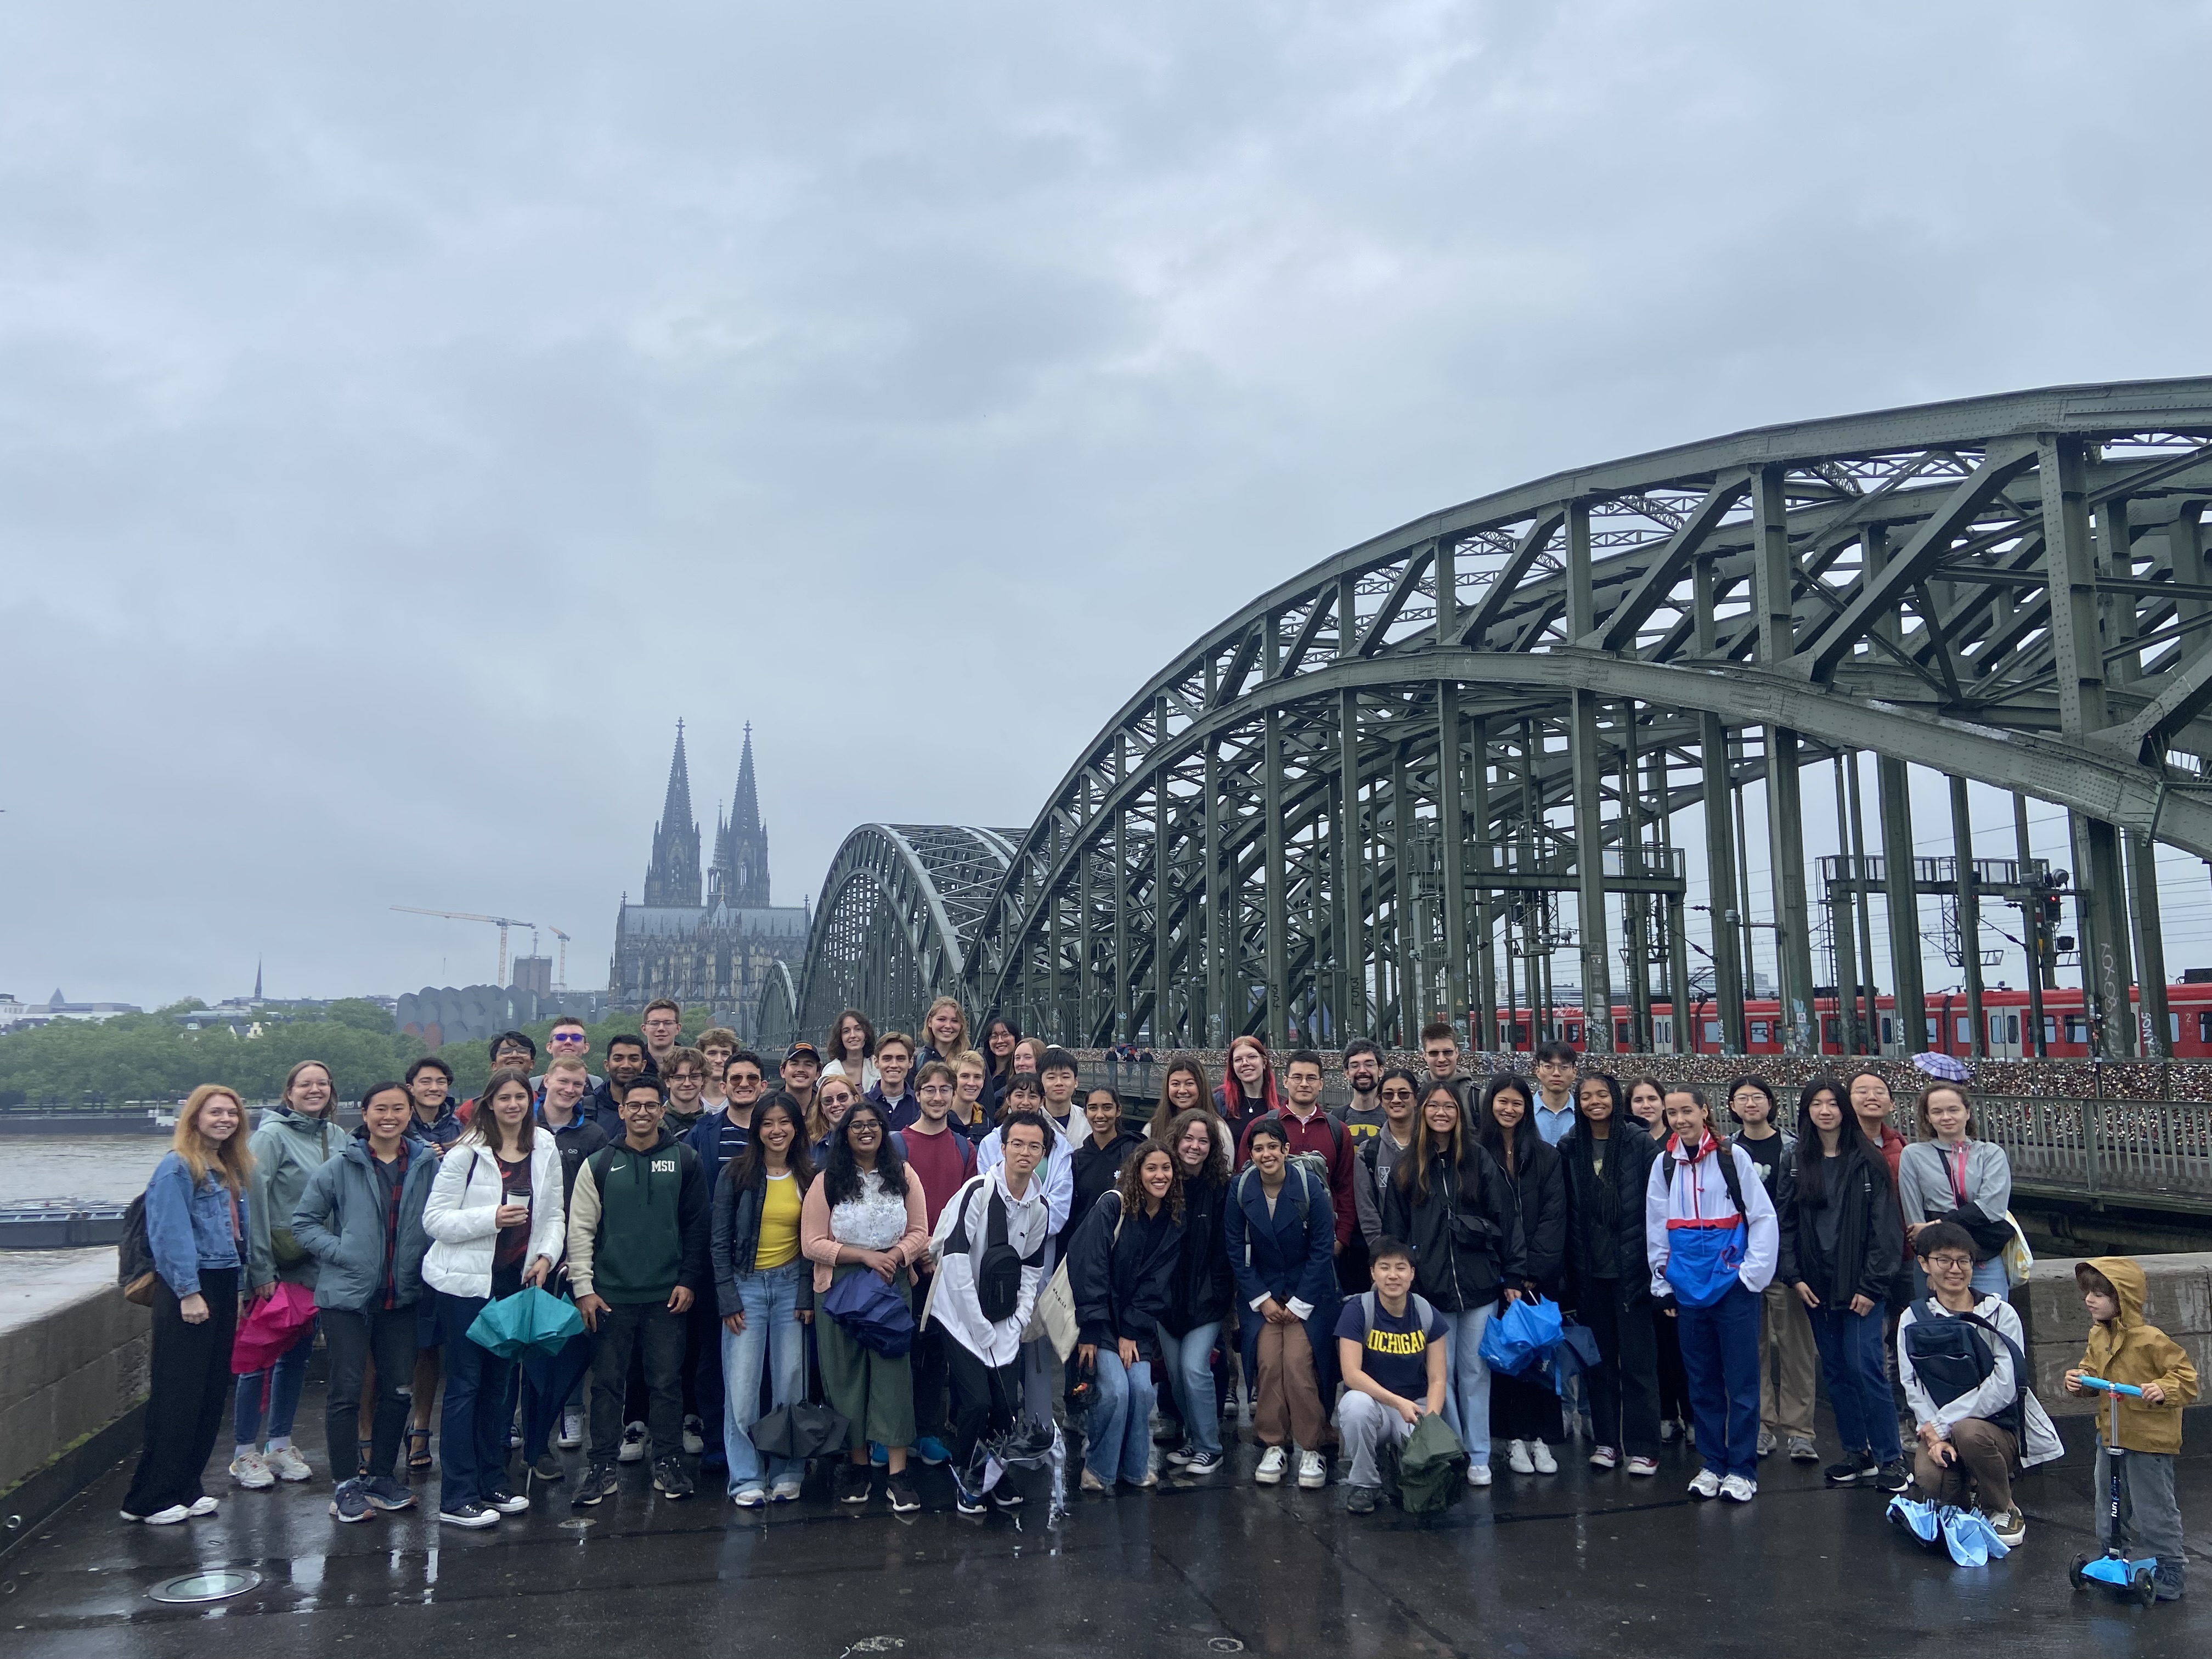 A picture of our group from the trip in Cologne.